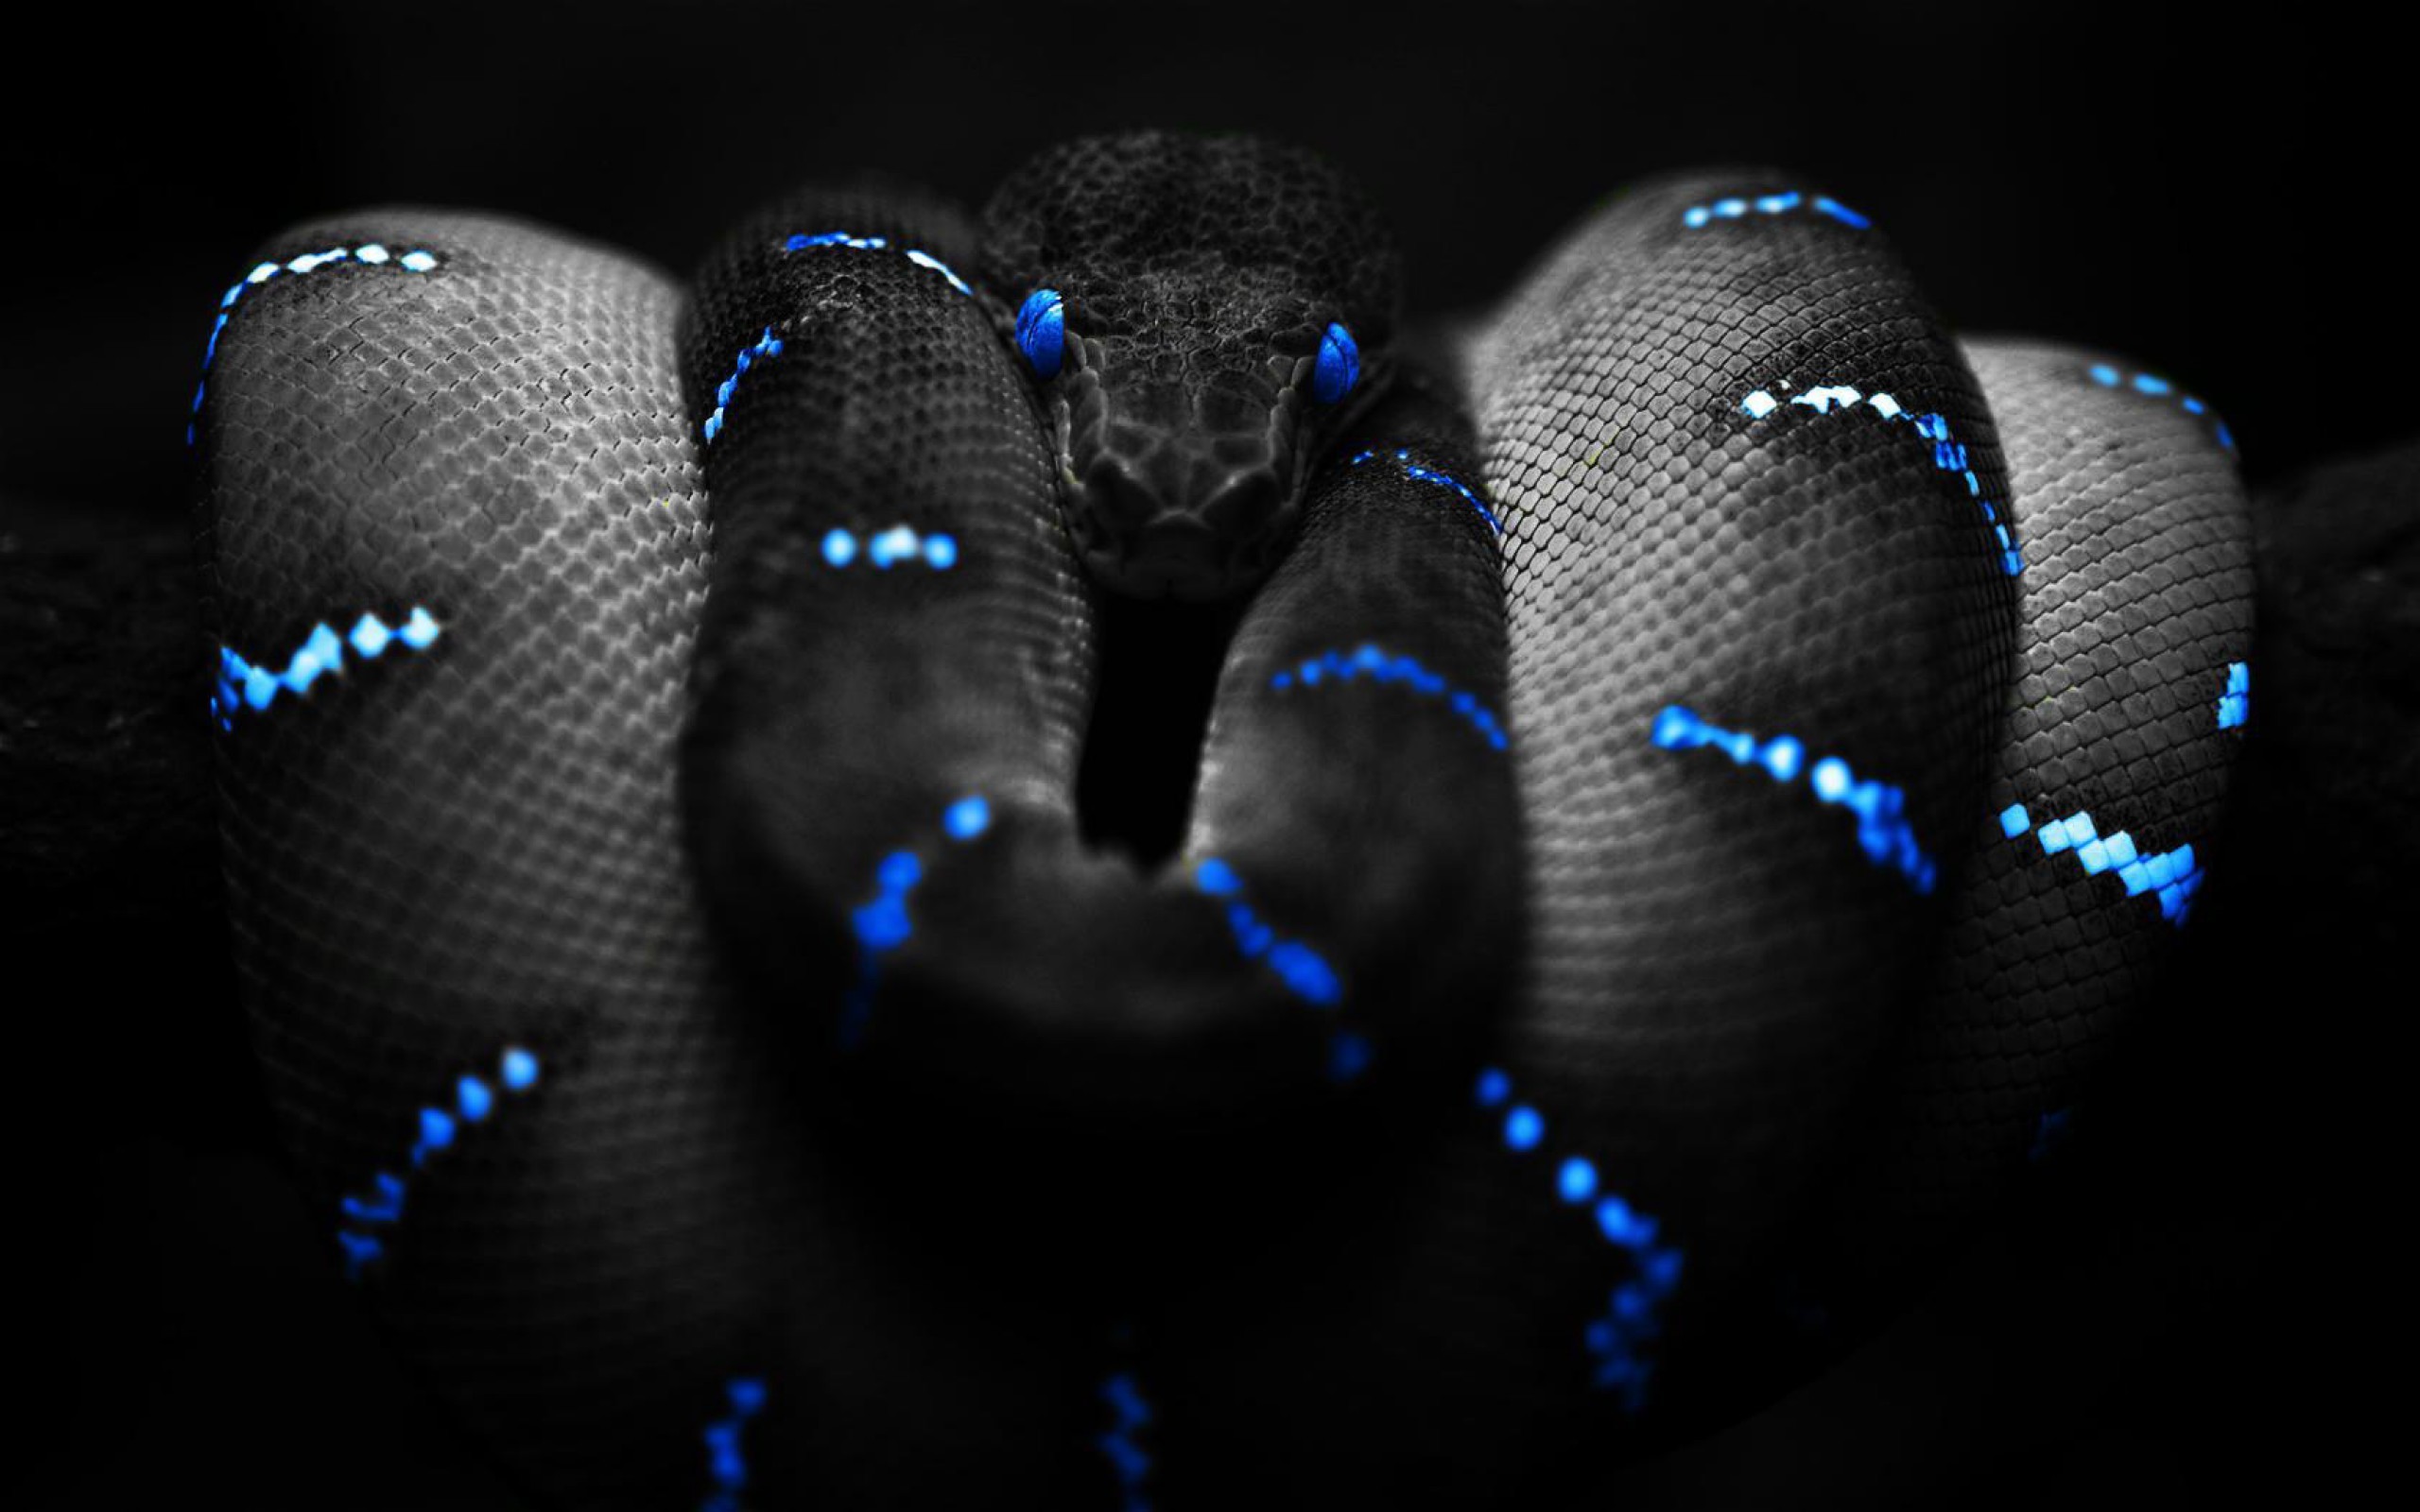 2560x1600 3D Snake Wallpaper and Image Free Download